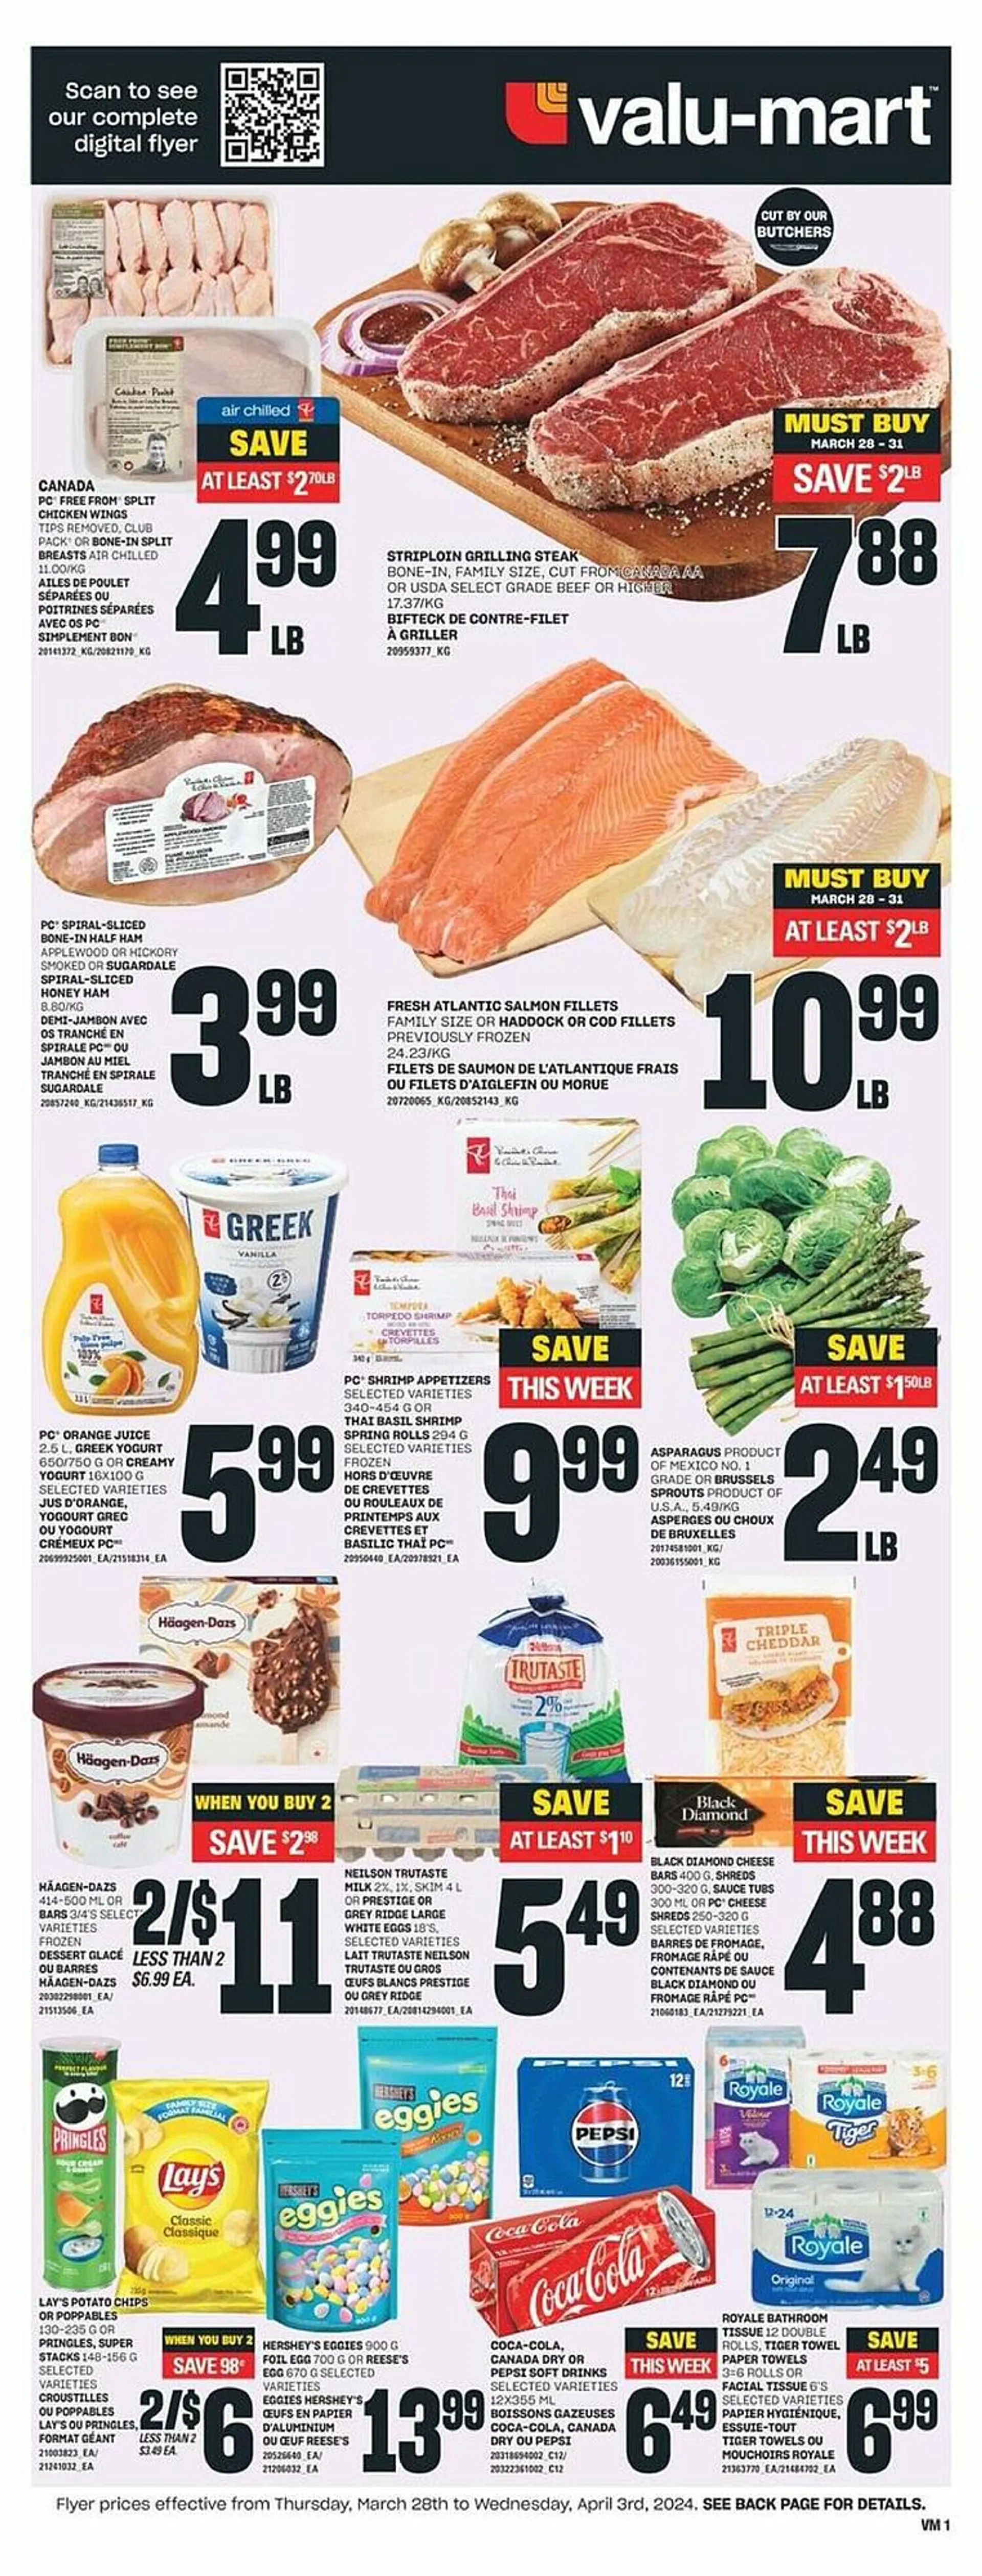 Valu-mart flyer from March 27 to April 3 2024 - flyer page 